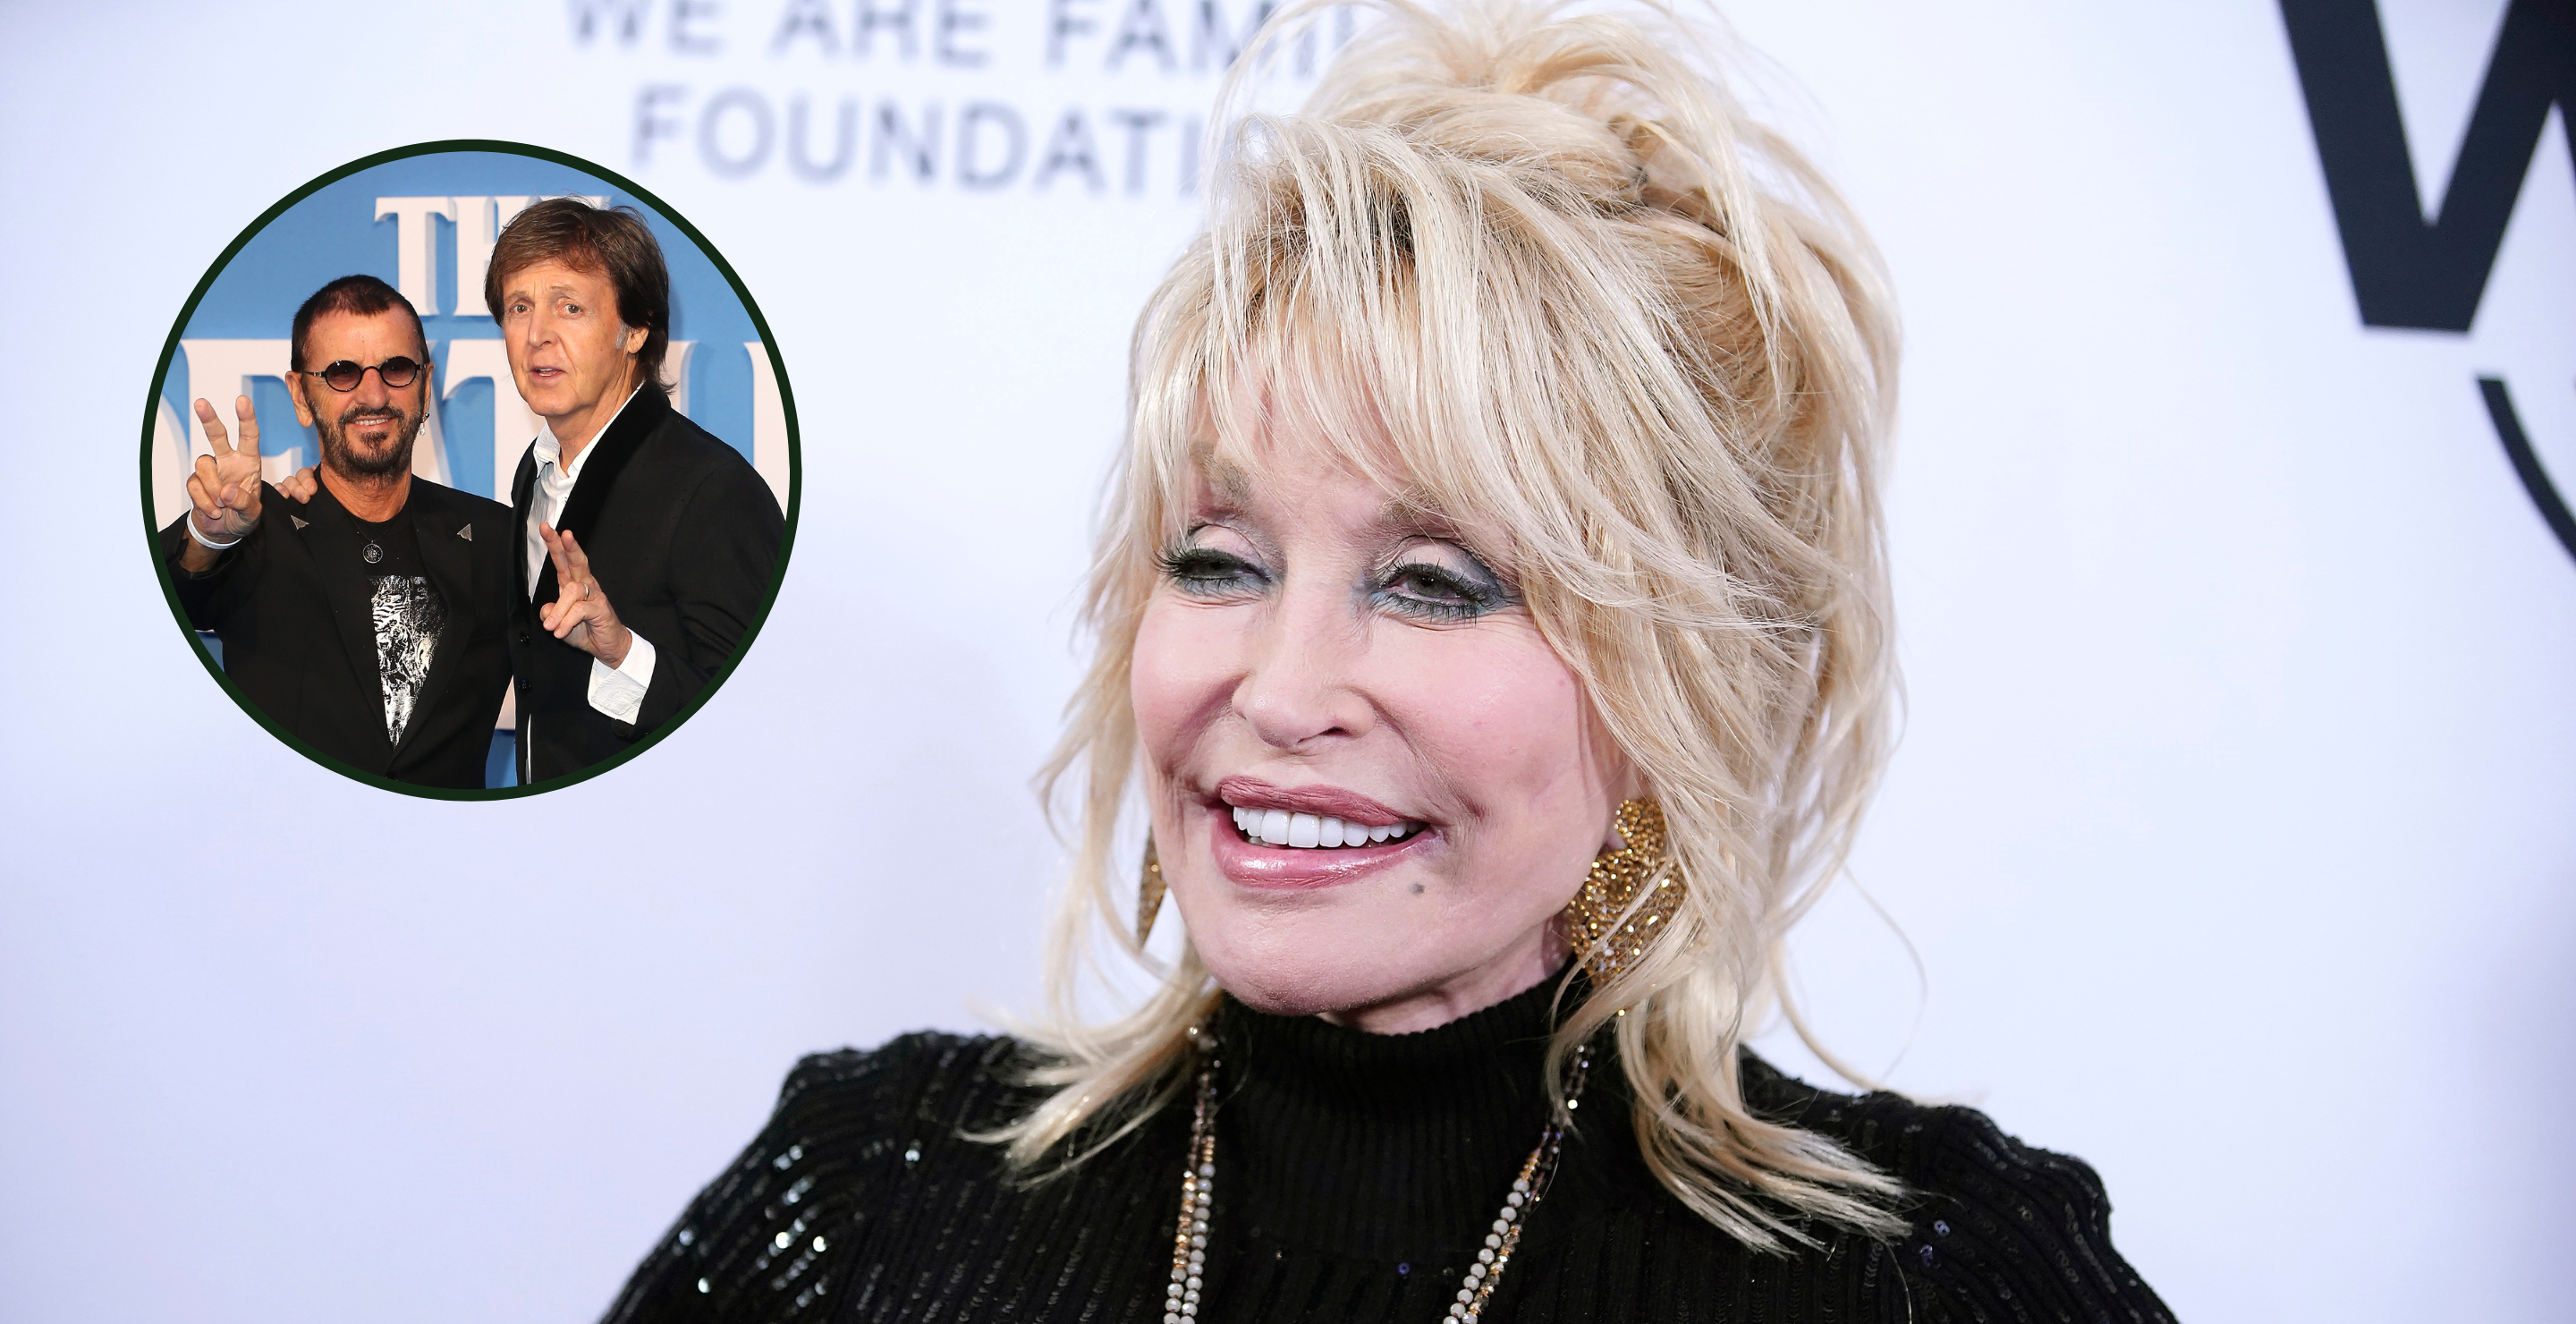 NEW YORK, NEW YORK - NOVEMBER 05: Dolly Parton attends We Are Family Foundation honors Dolly Parton & Jean Paul Gaultier at Hammerstein Ballroom on November 05, 2019 in New York City and LONDON, ENGLAND - SEPTEMBER 15: Ringo Starr and Sir Paul McCartney arrive for the World premiere of "The Beatles: Eight Days A Week - The Touring Years" at Odeon Leicester Square on September 15, 2016 in London, England.